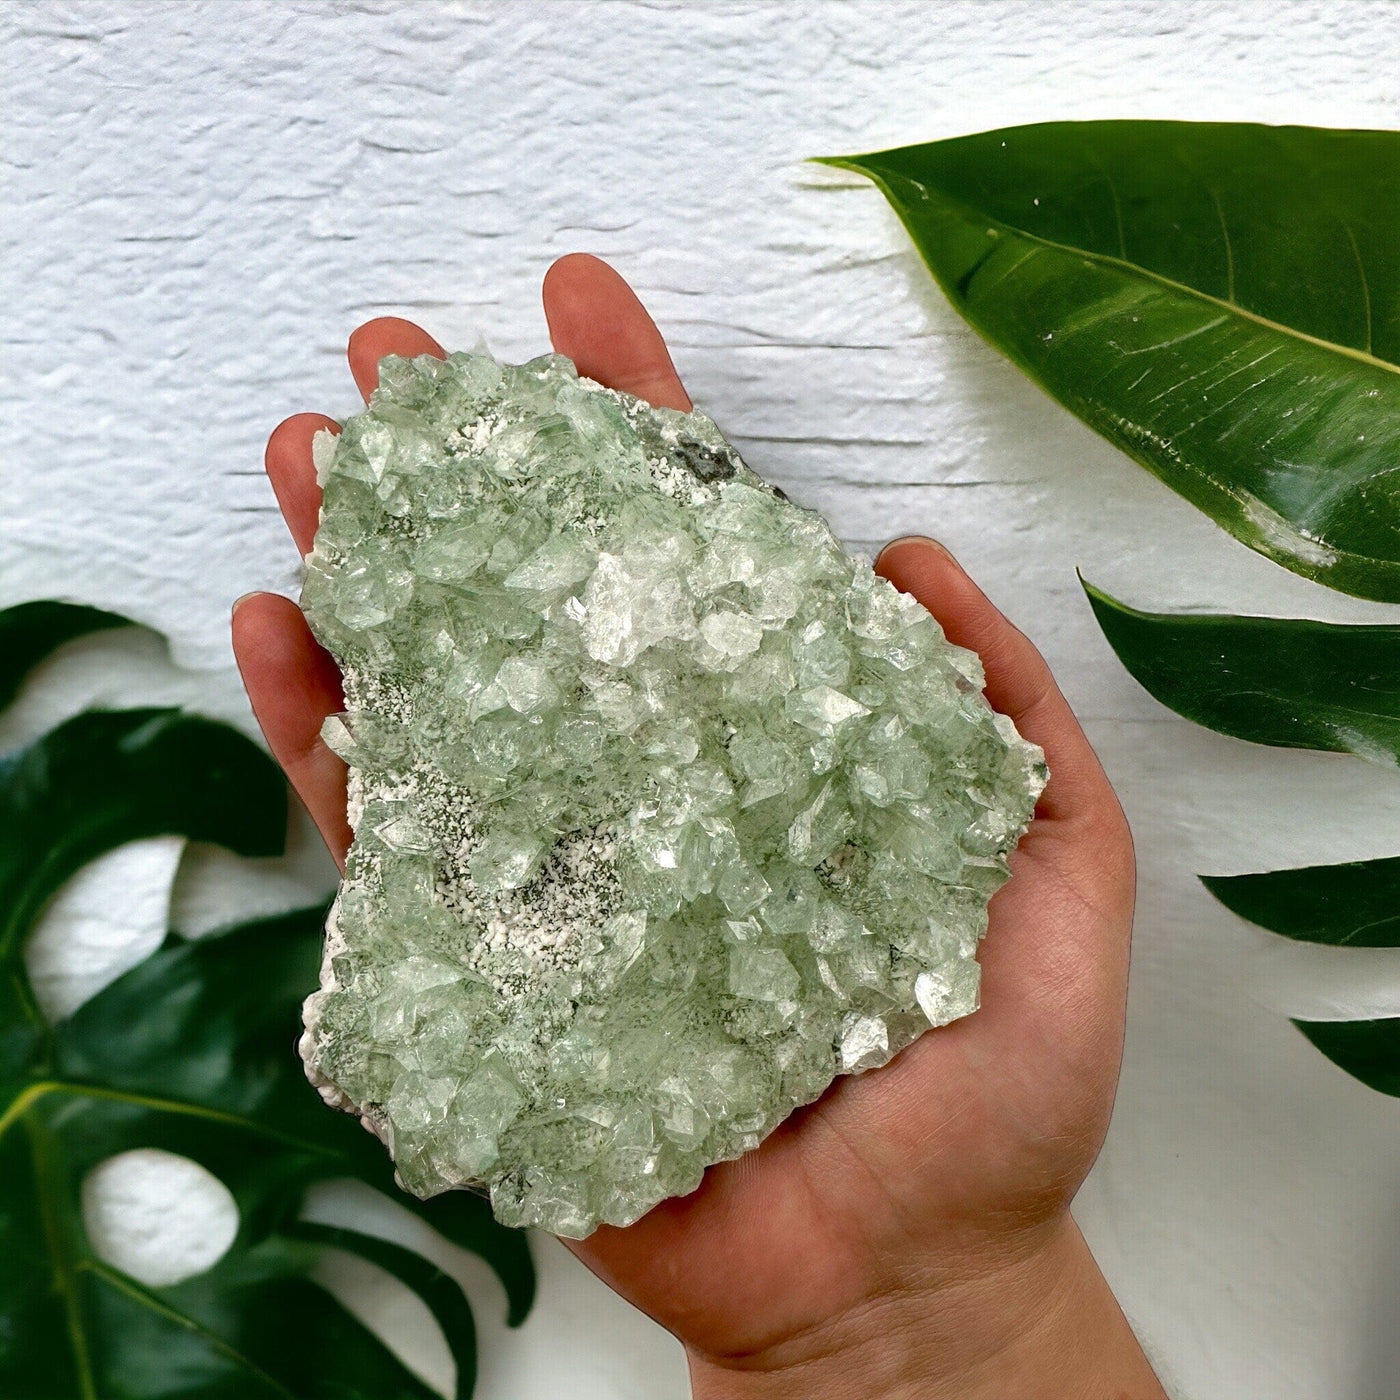 Green Apophyllite on Matrix Zeolite Crystal Cluster in hand with monstera leaves in background